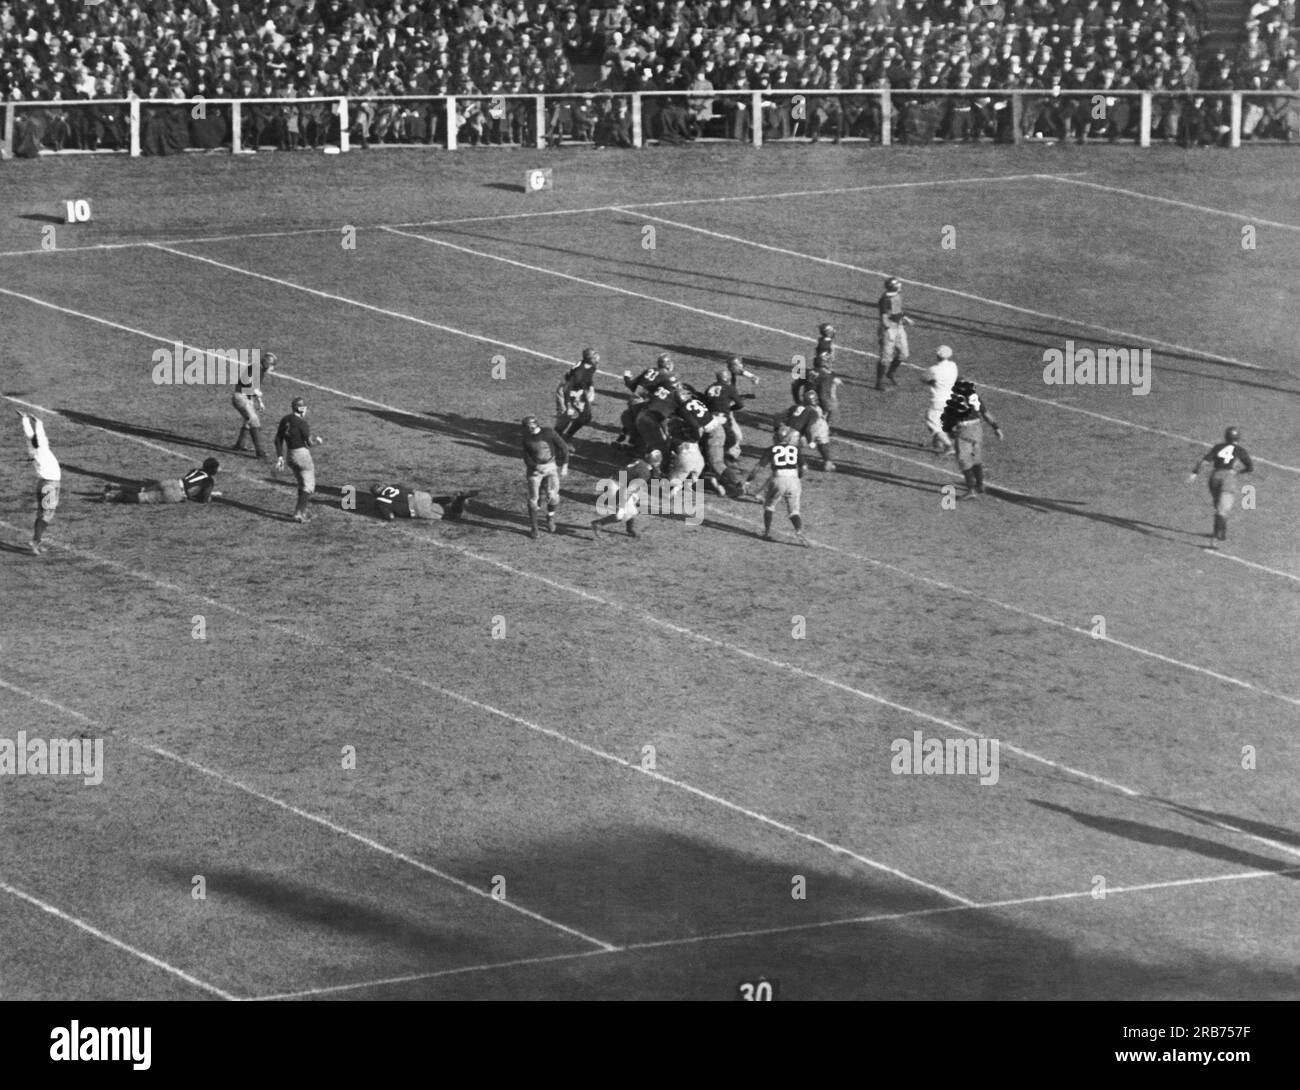 New Haven, Connecticut:  November 25, 1922 The referee signals 'Good' as O'Hearn of the Yale team drop kicks the football from the 20 yard line in its game against Harvard. Harvard won 10 to 3. Stock Photo